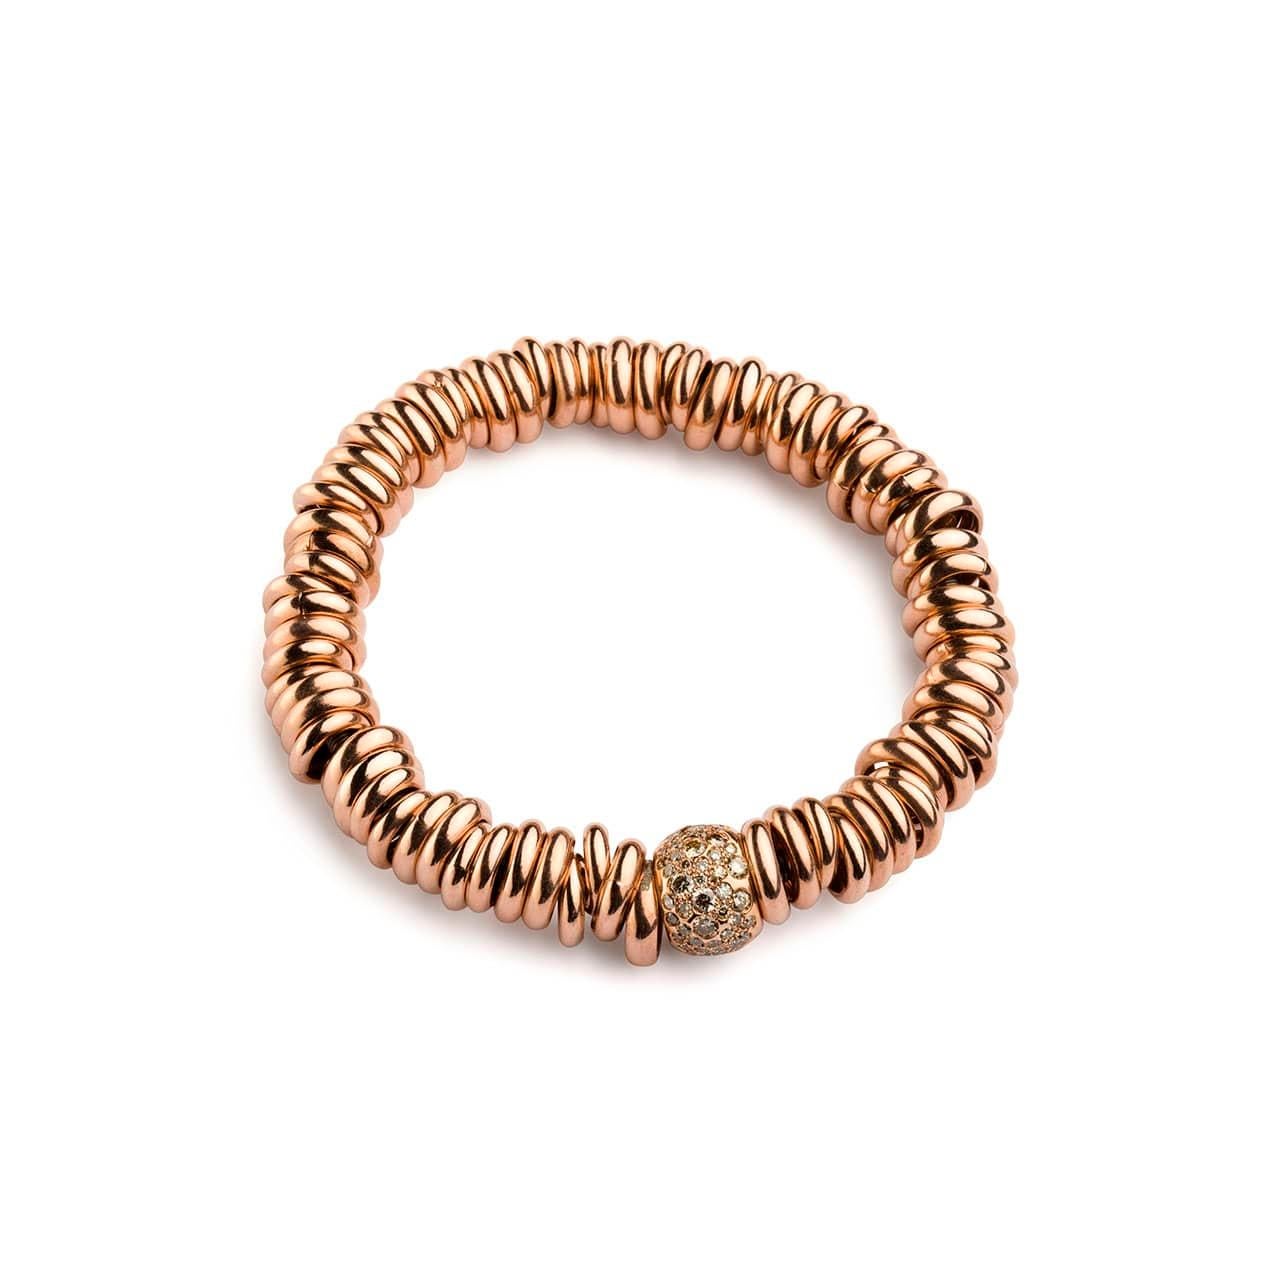 Bang Silver Bracelet / Cognac rose gold. Stretch silver rose gold bracelet with cognac diamonds (ct. 0,92) set in rose gold 18kt.
The unconventional lines of the Bang elastic bracelets associate a steel core with ring elements in silver, gold,